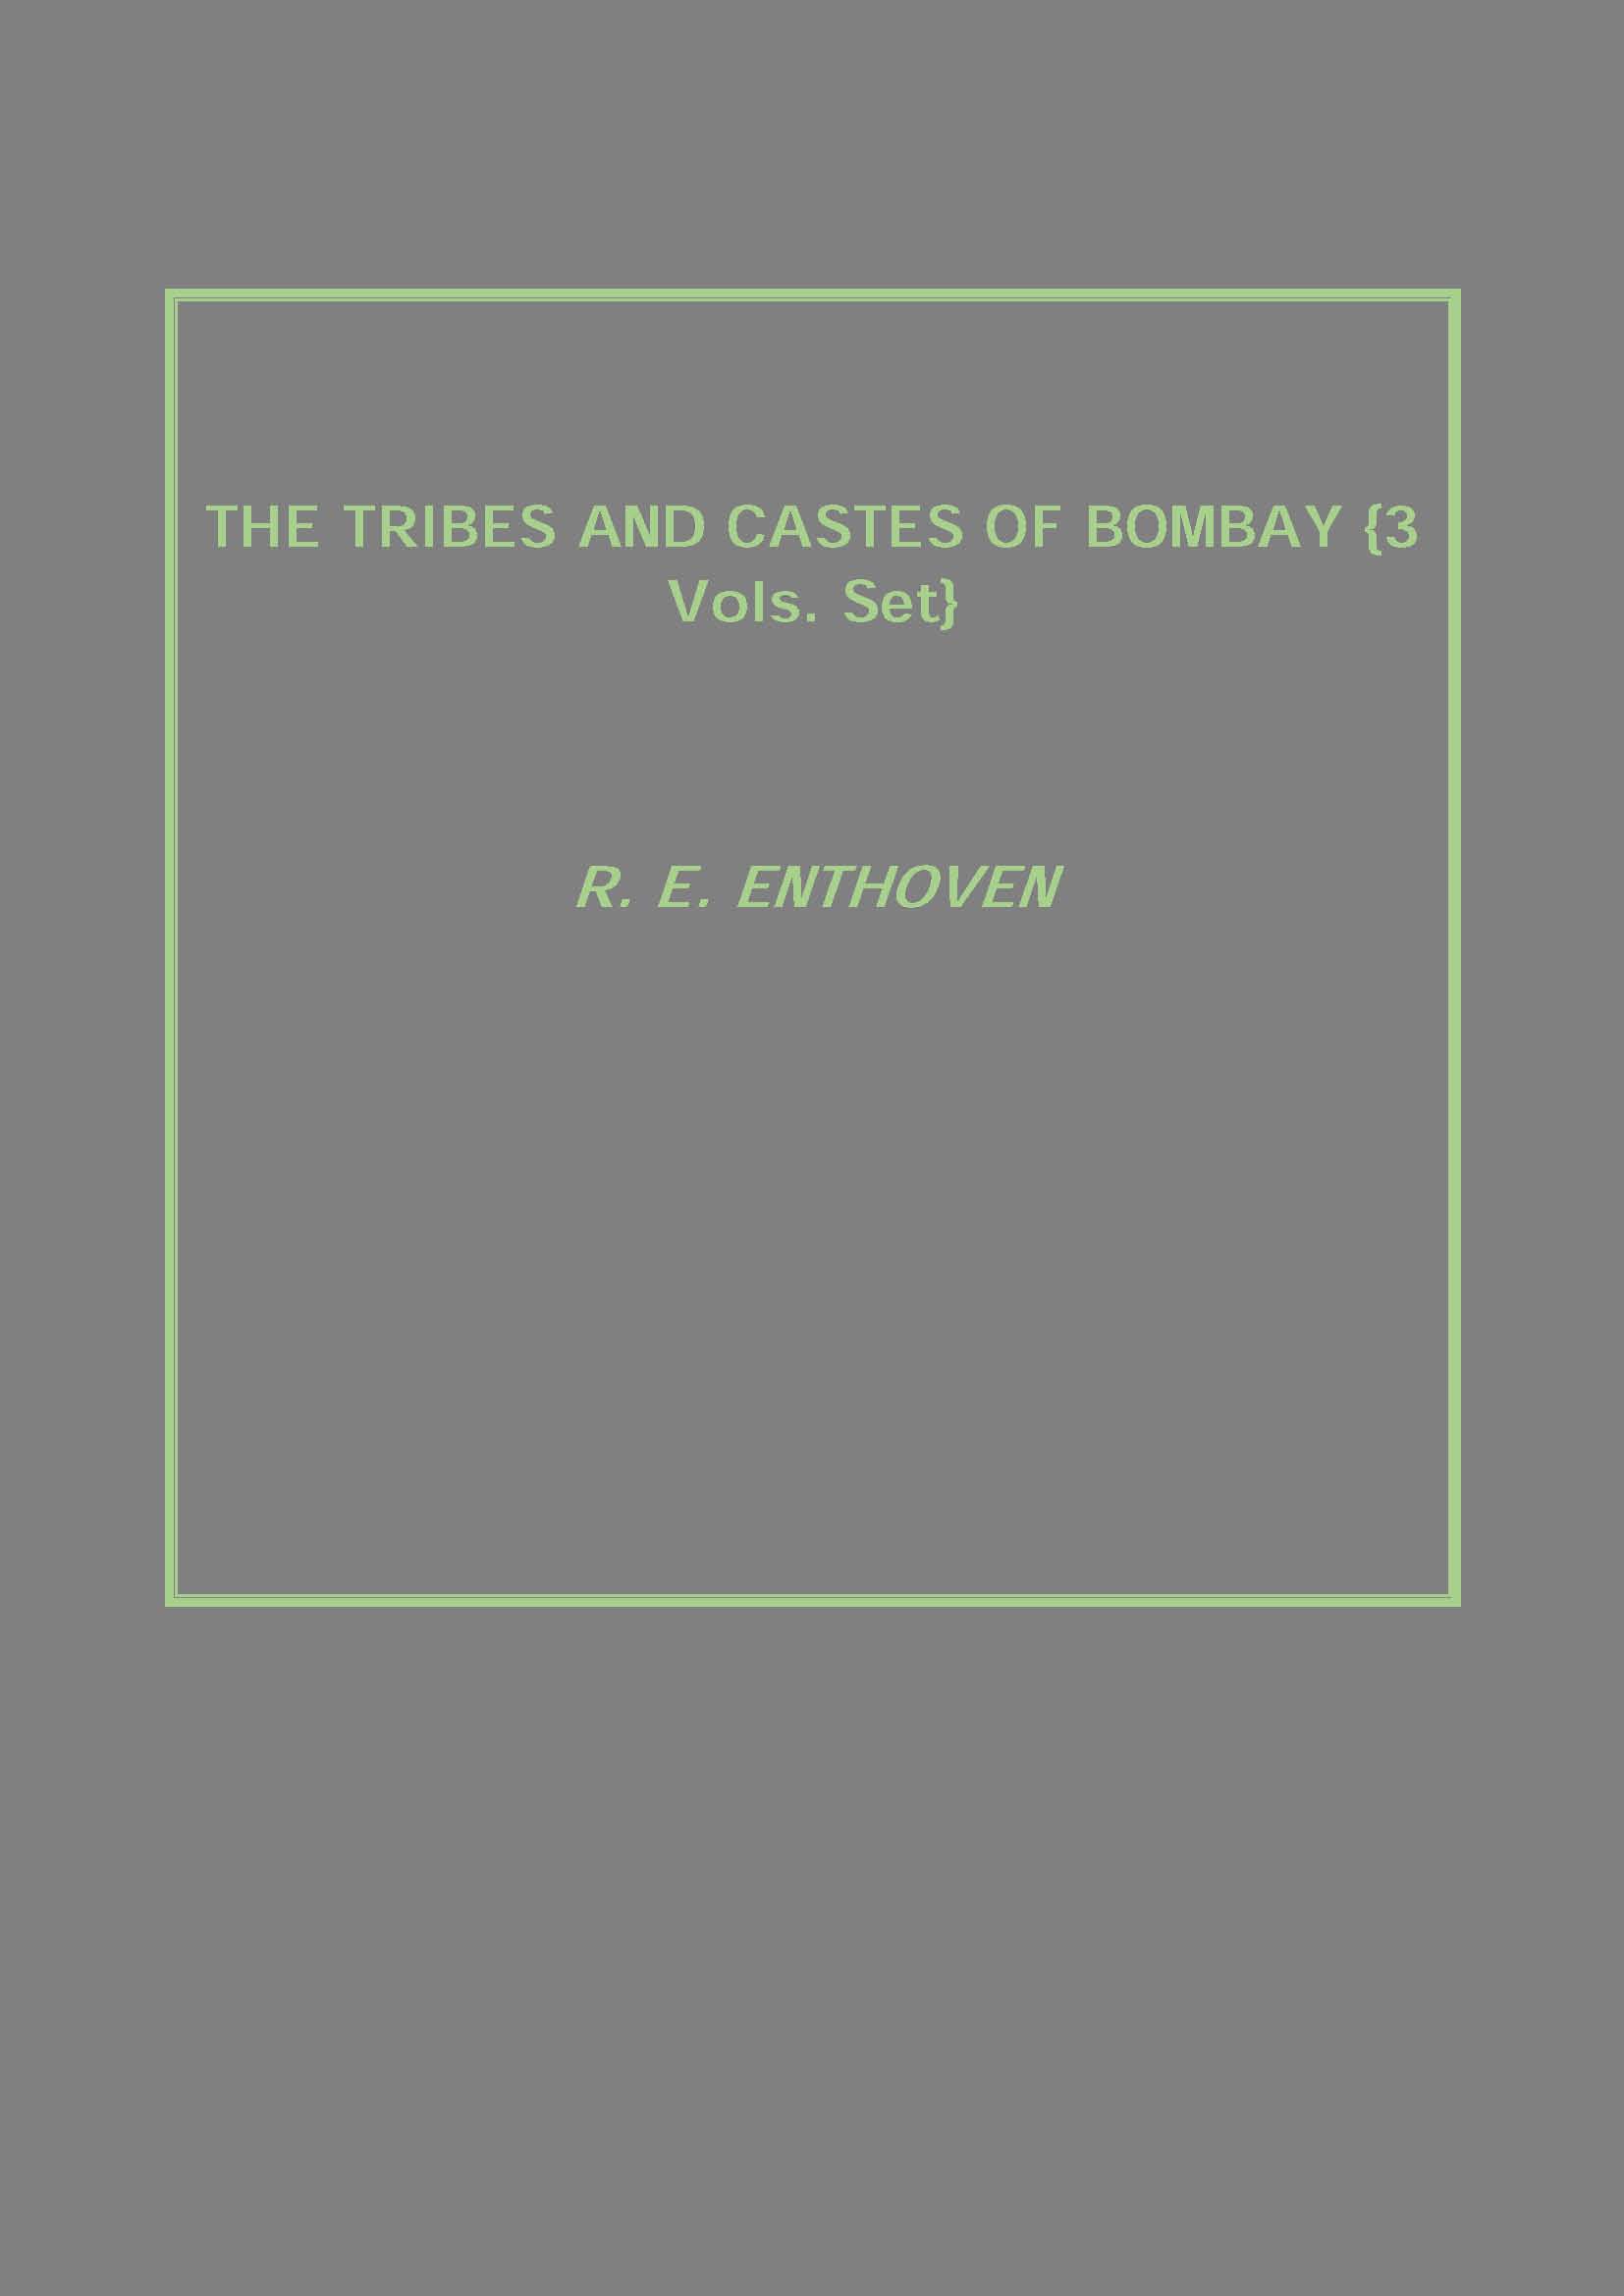 The Tribes and Castes of Bombay